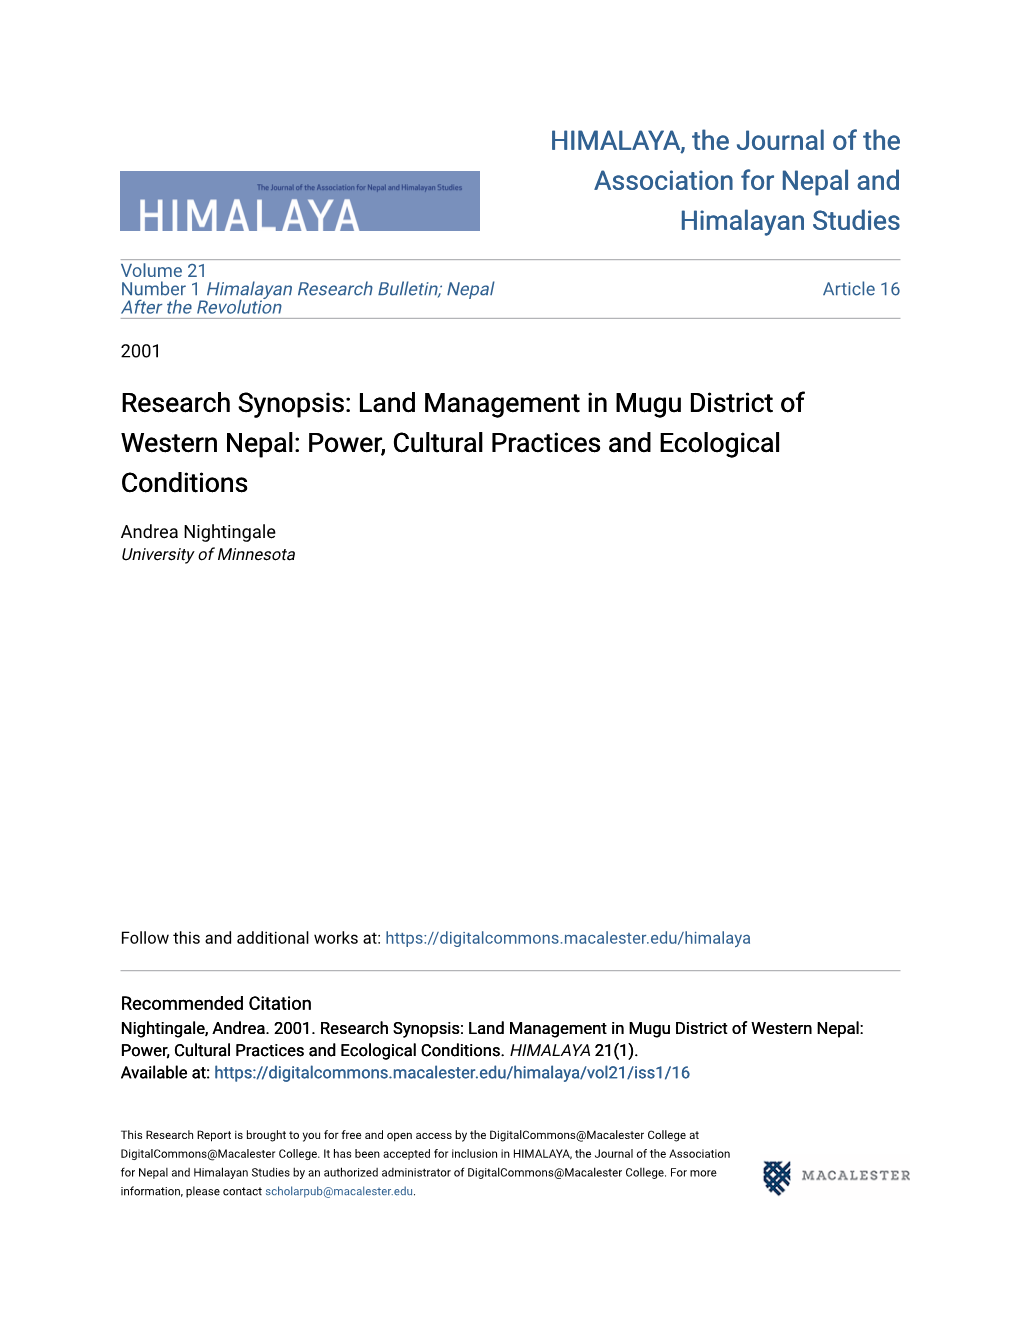 Research Synopsis: Land Management in Mugu District of Western Nepal: Power, Cultural Practices and Ecological Conditions